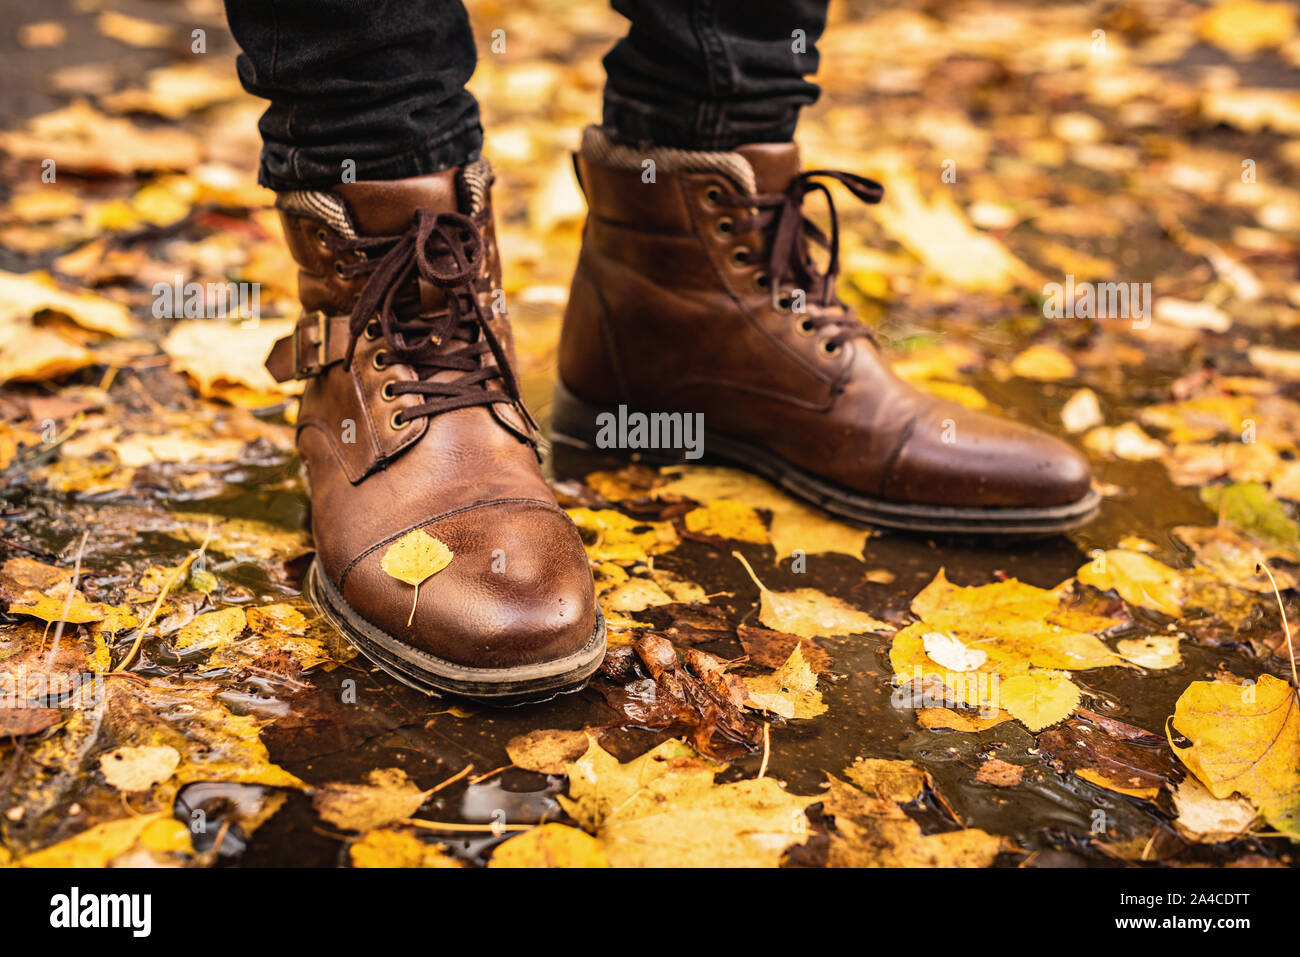 Male feet in leather boots standing in autumn puddle with colorful maple leaves all around. Fall season concept, autumn fashion Stock Photo